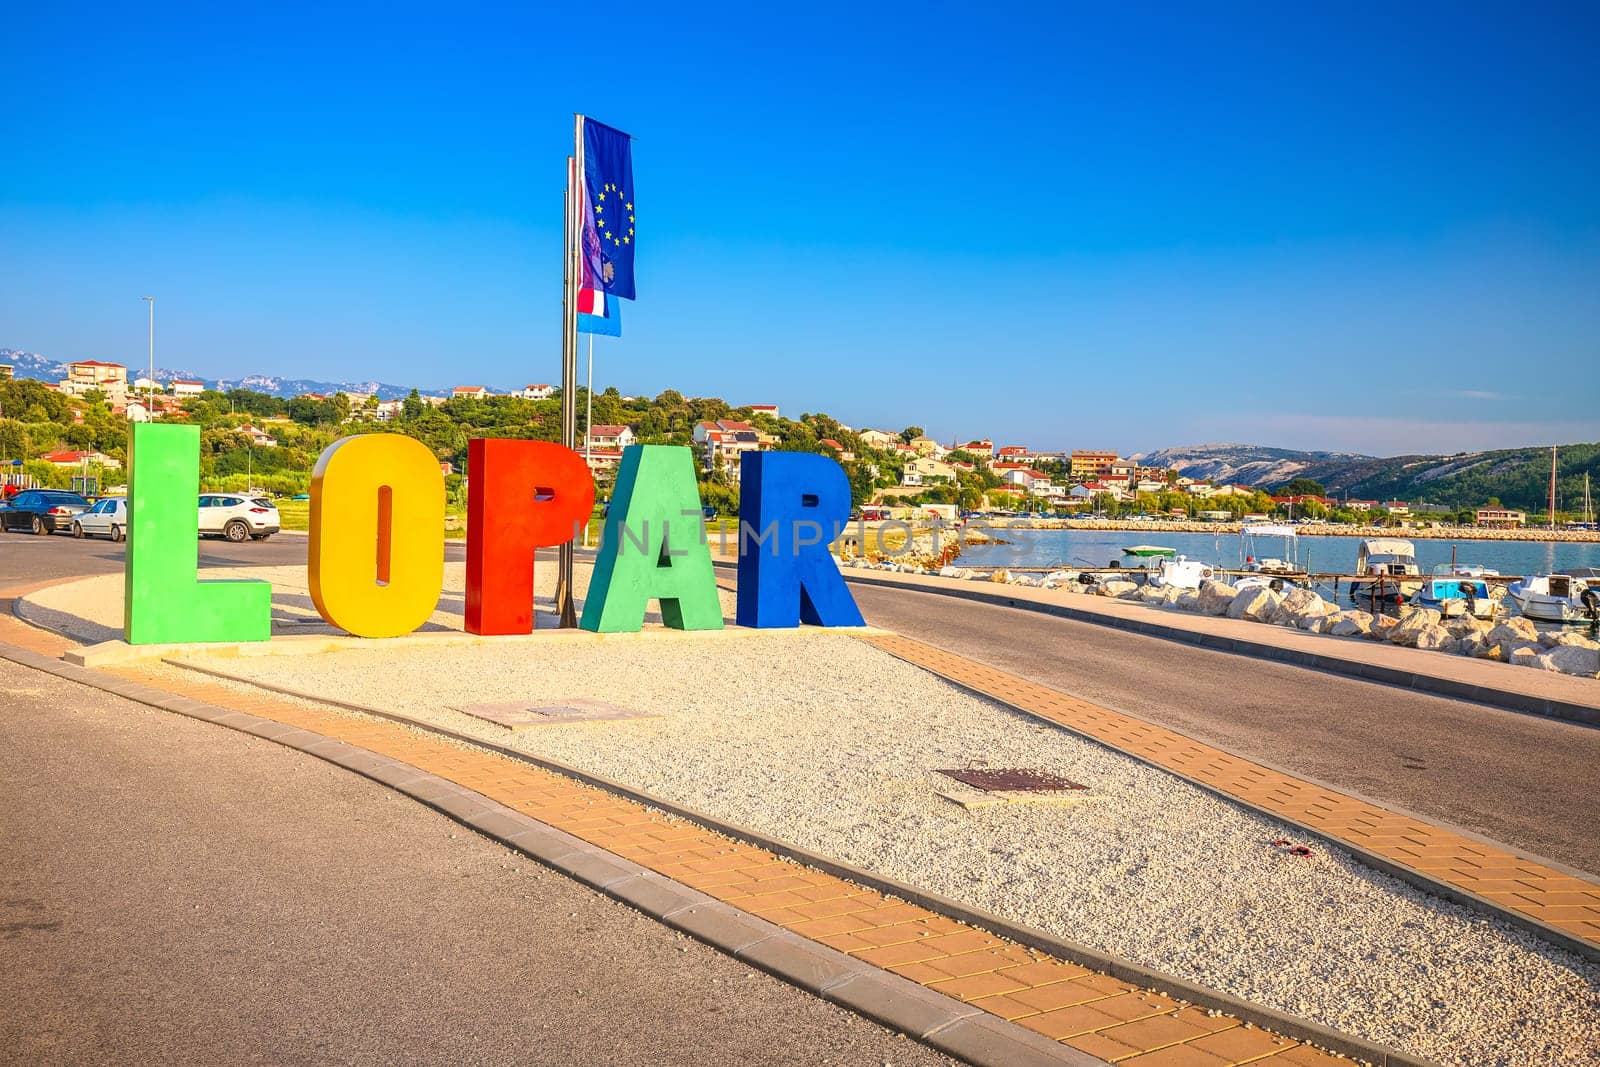 Town of Lopar on Rab island sign and beachfront view by xbrchx